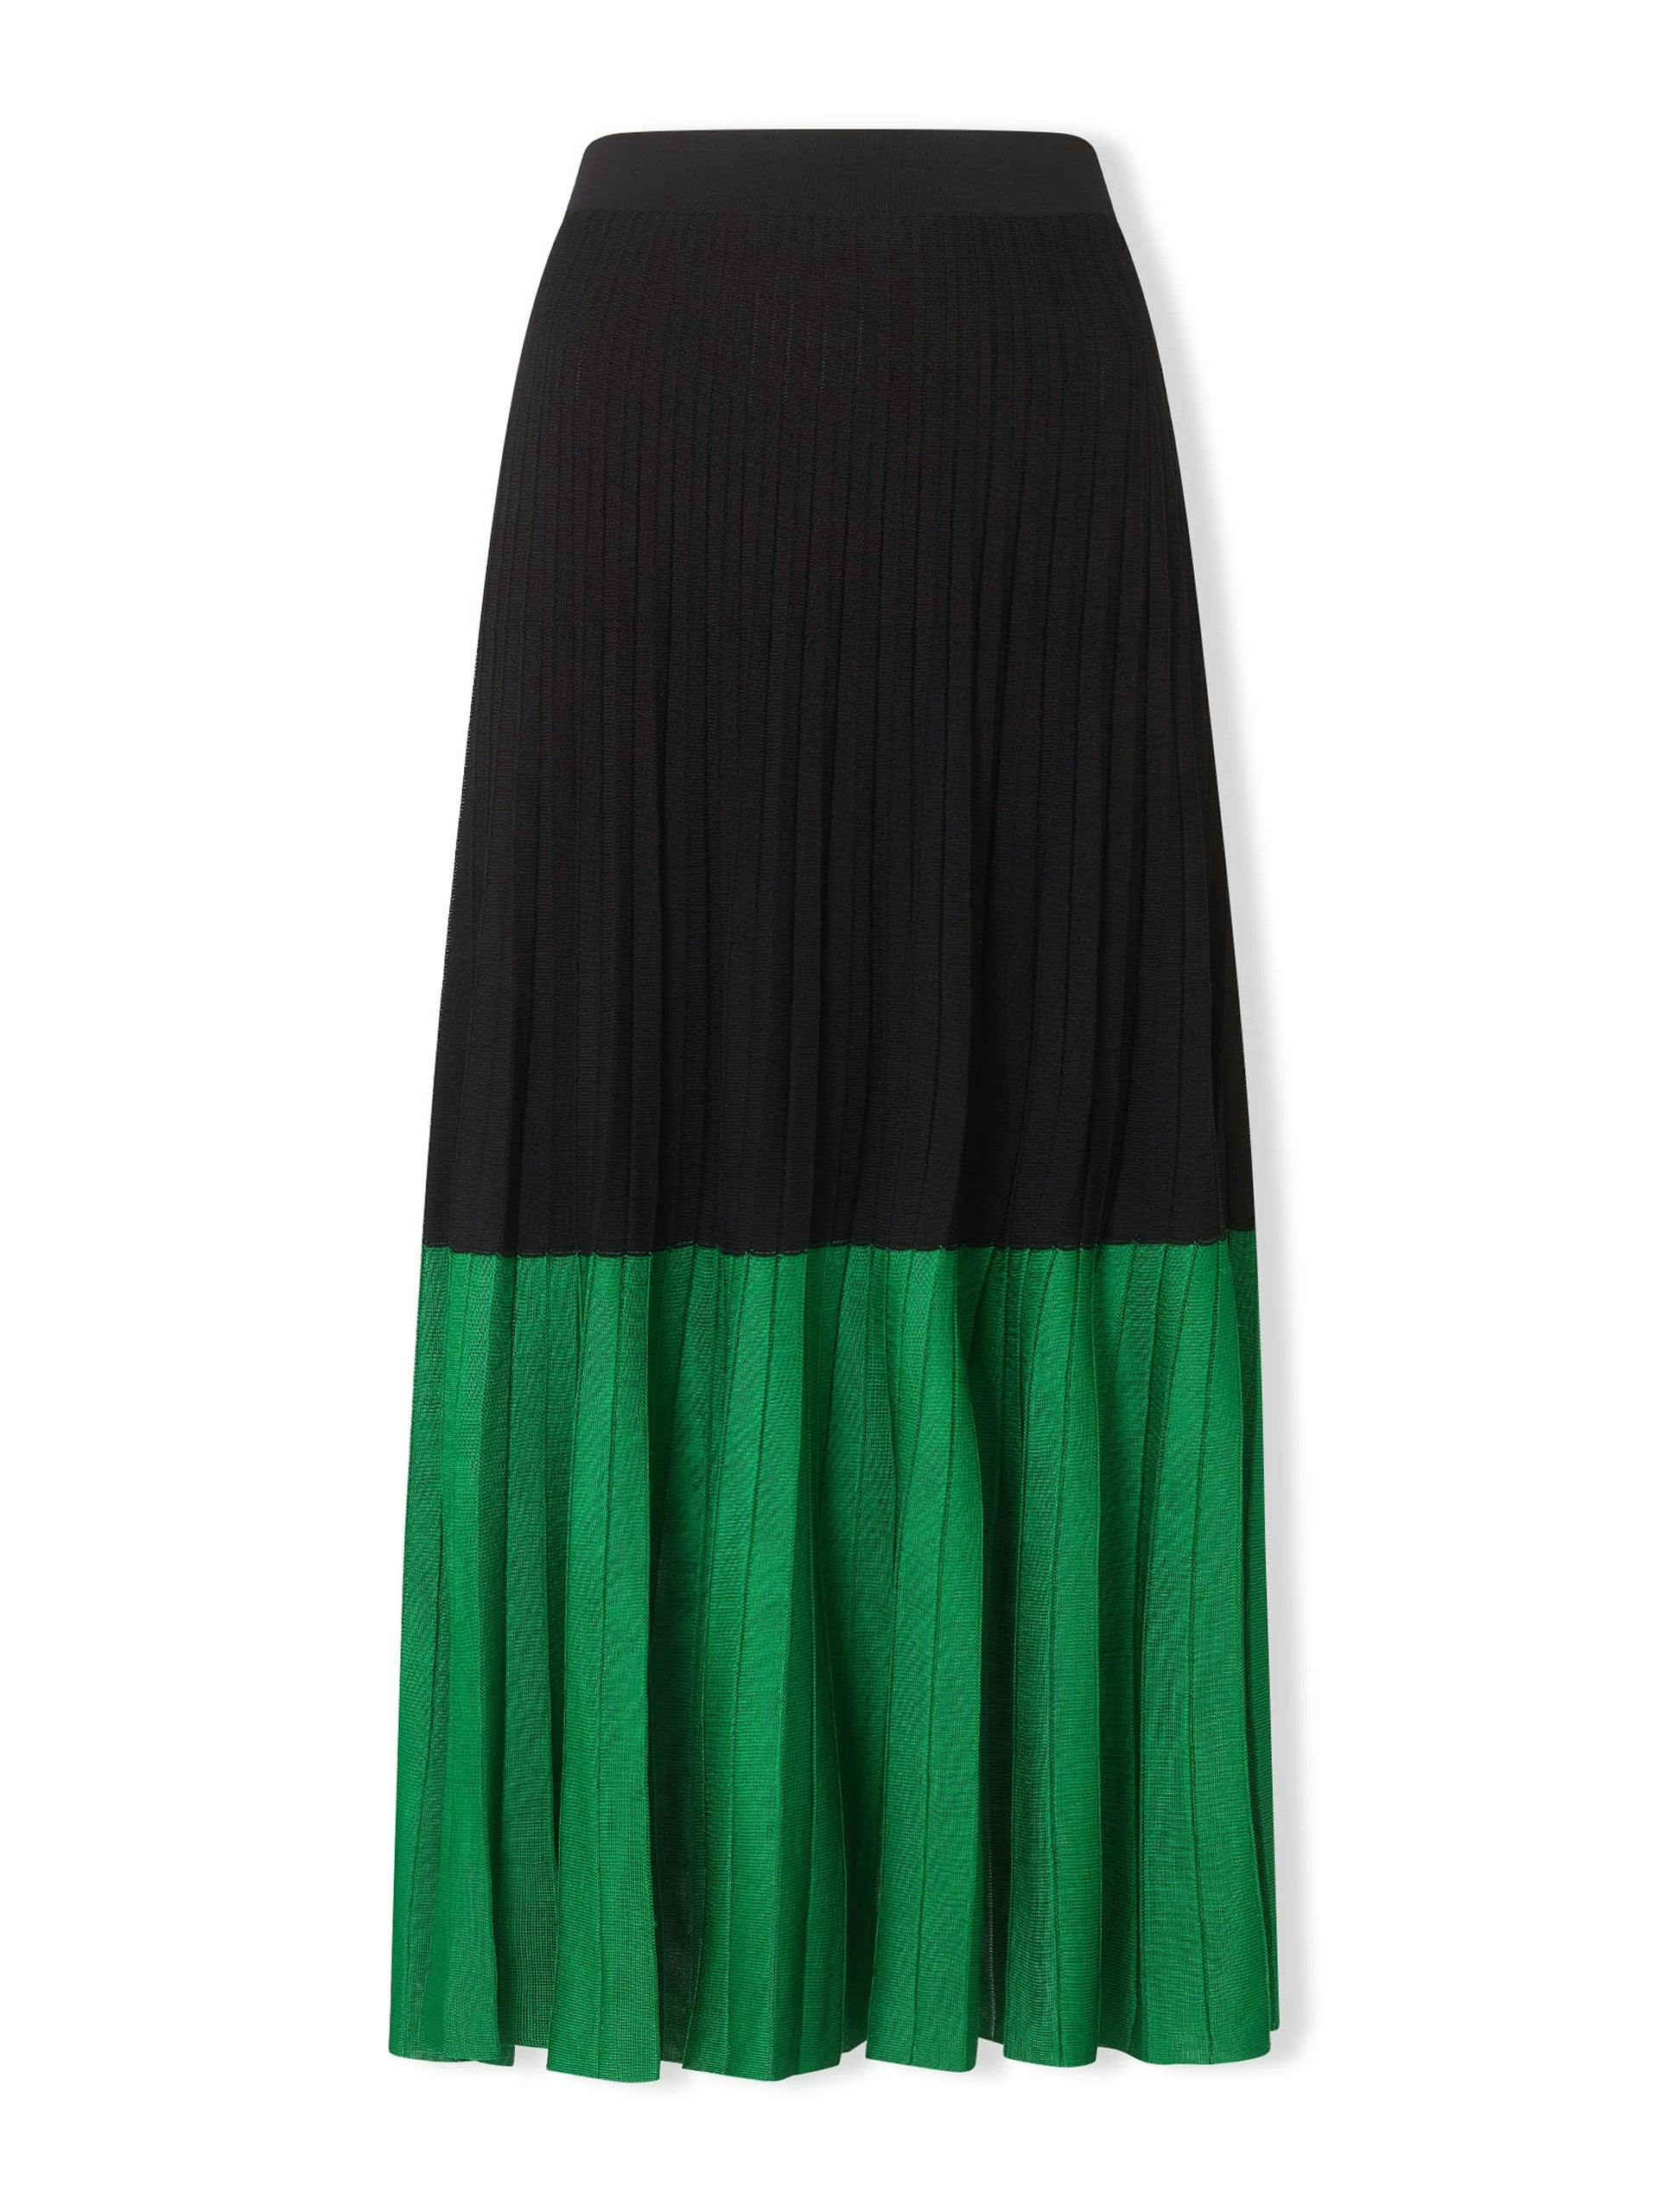 Black and green Colette pleated knit midi skirt with contrast hem